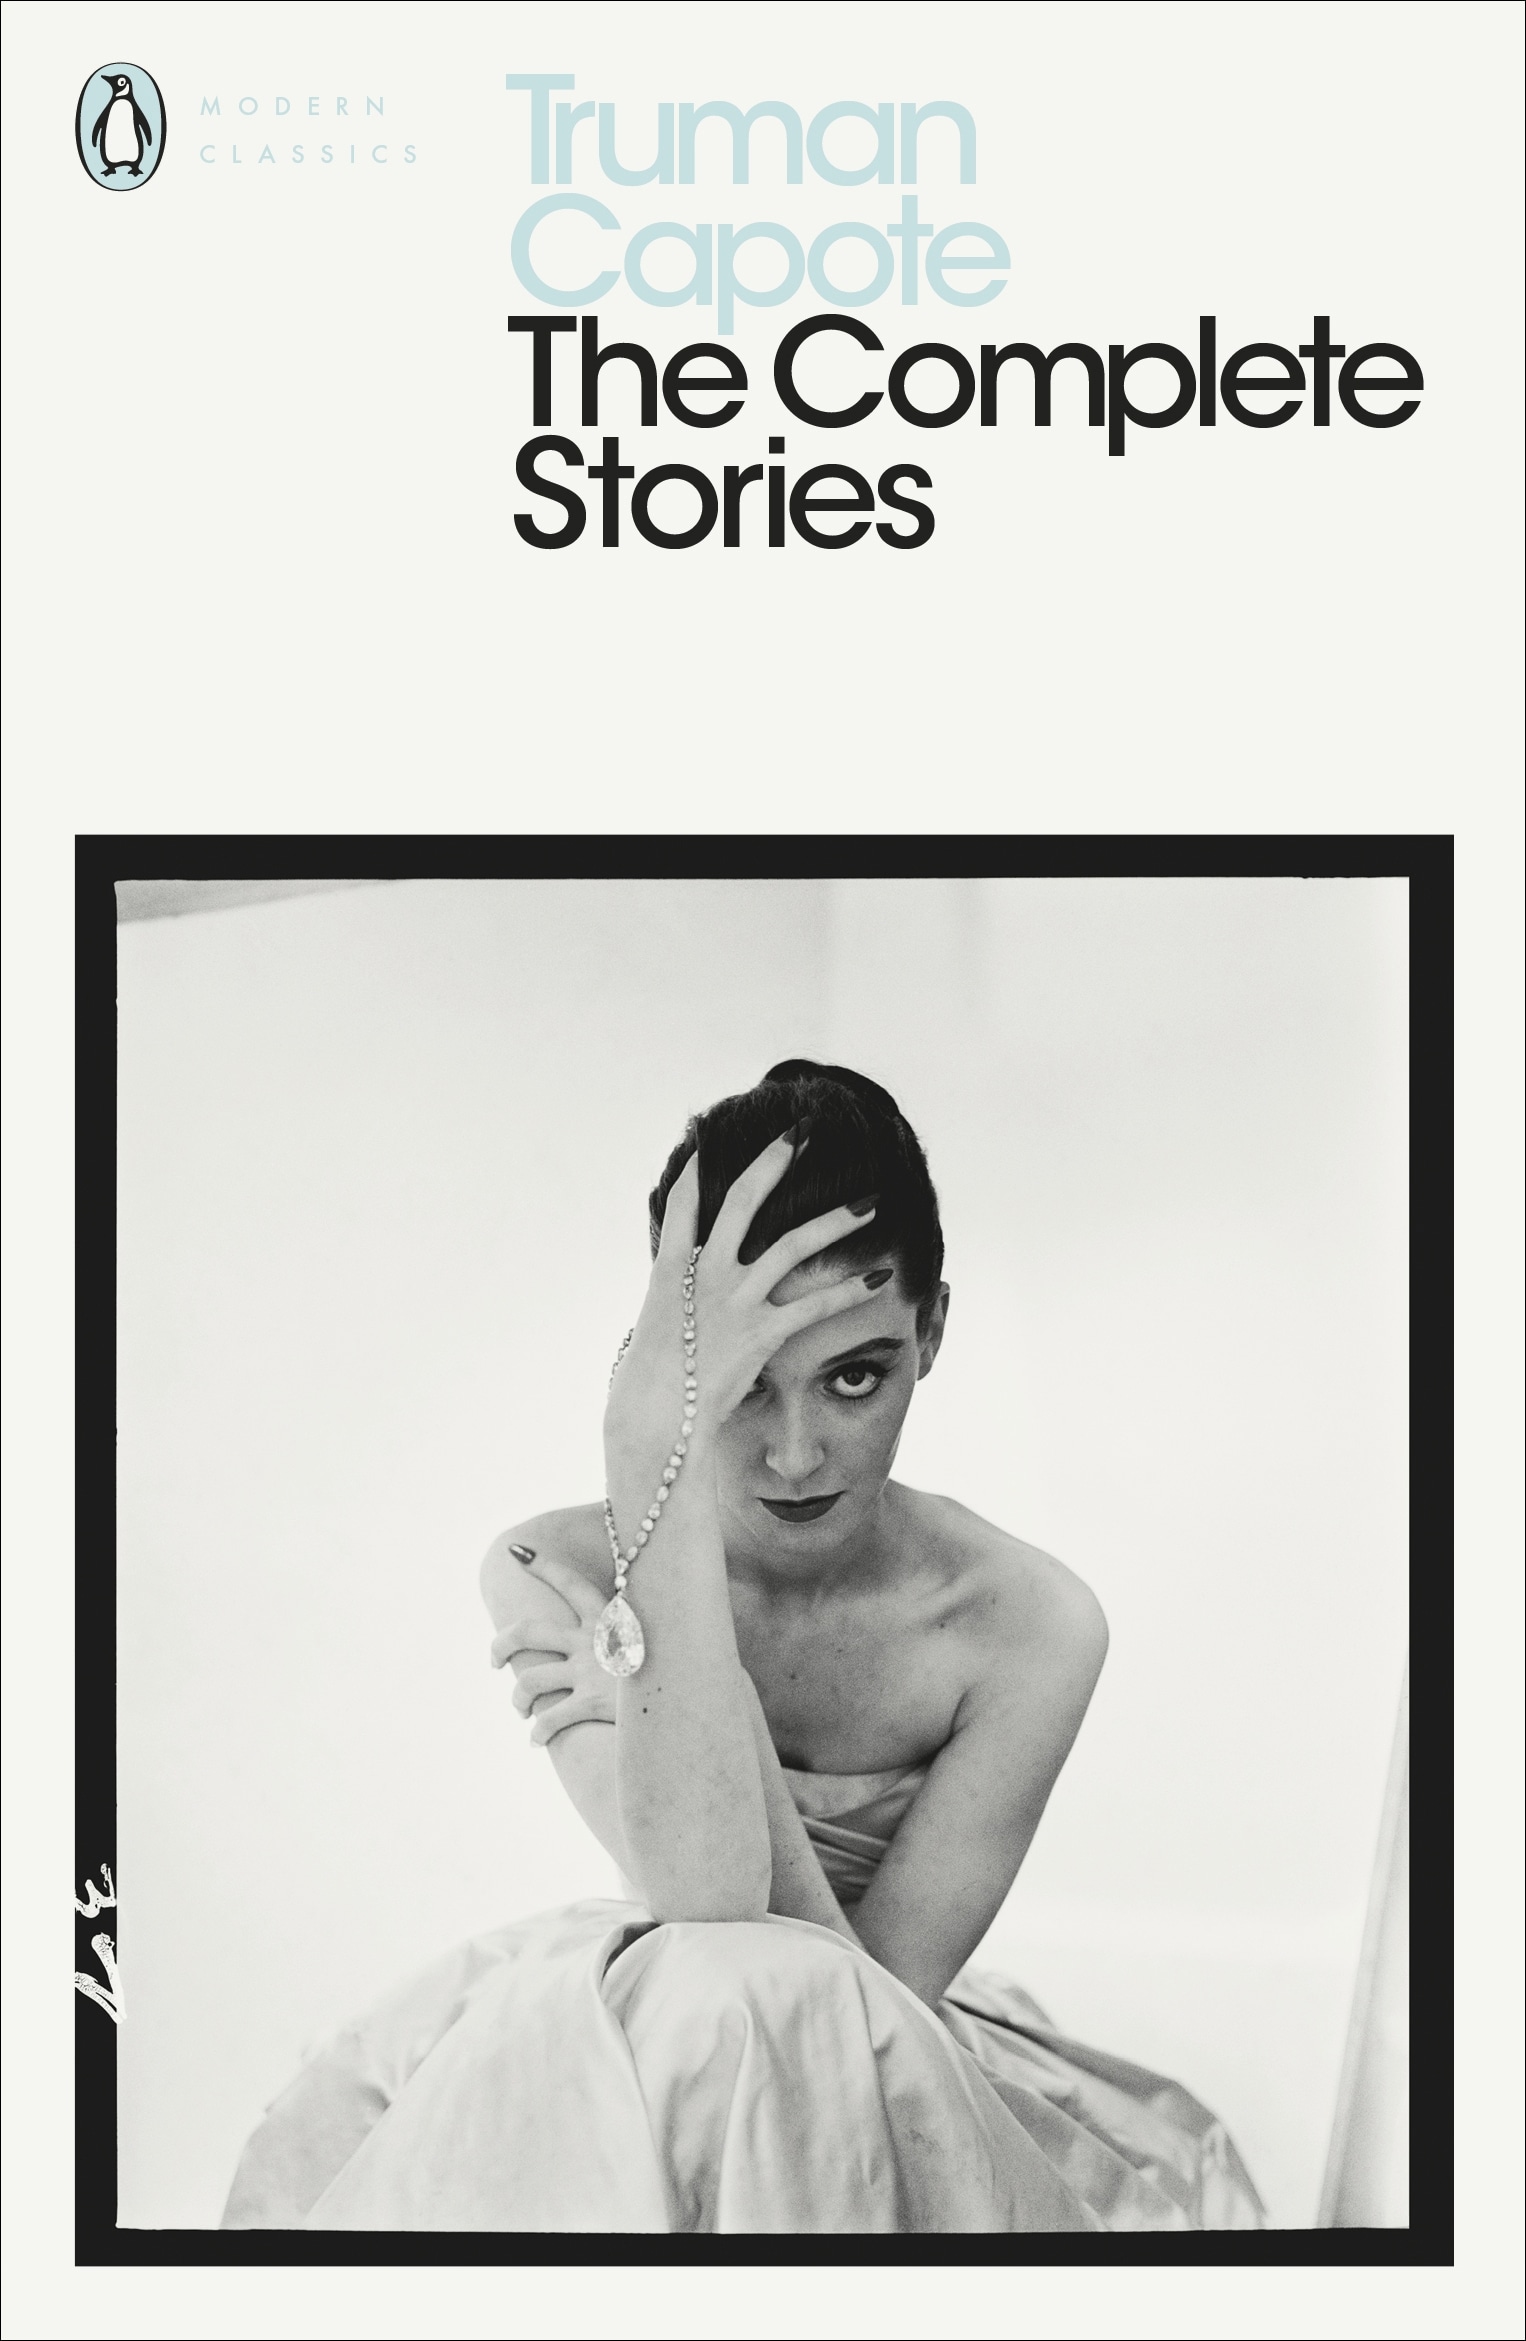 Book “The Complete Stories” by Truman Capote, Reynolds Price — June 30, 2005